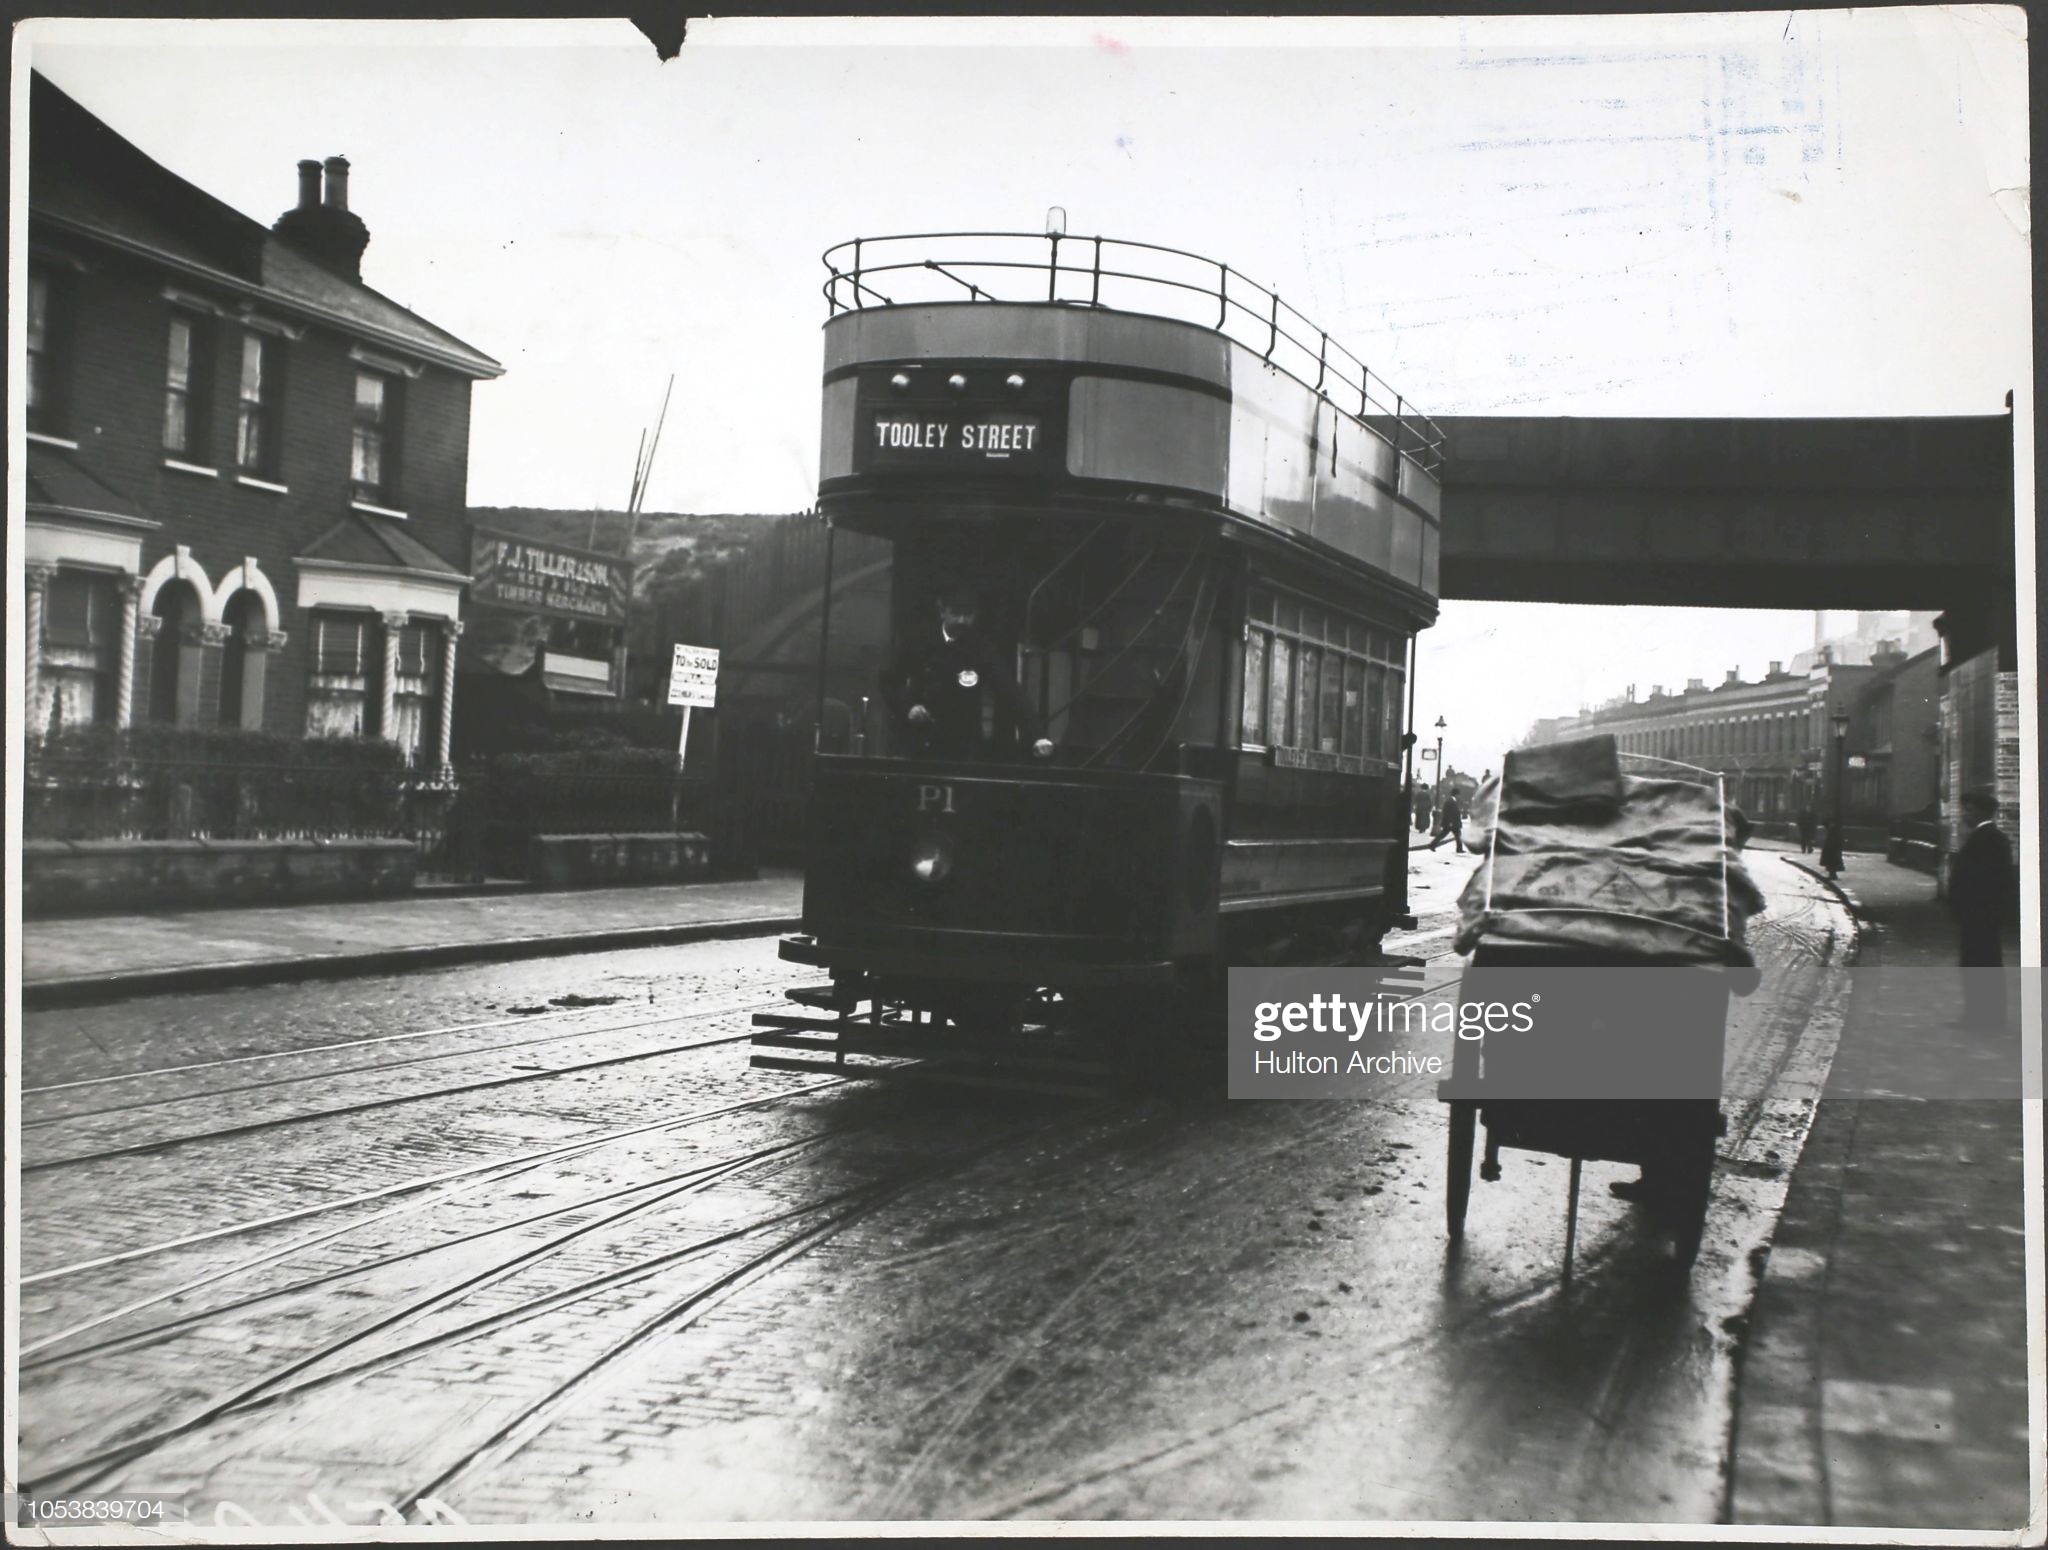 An LCC petrol-electric tram bound for Tooley Street in 1913. X.jpg